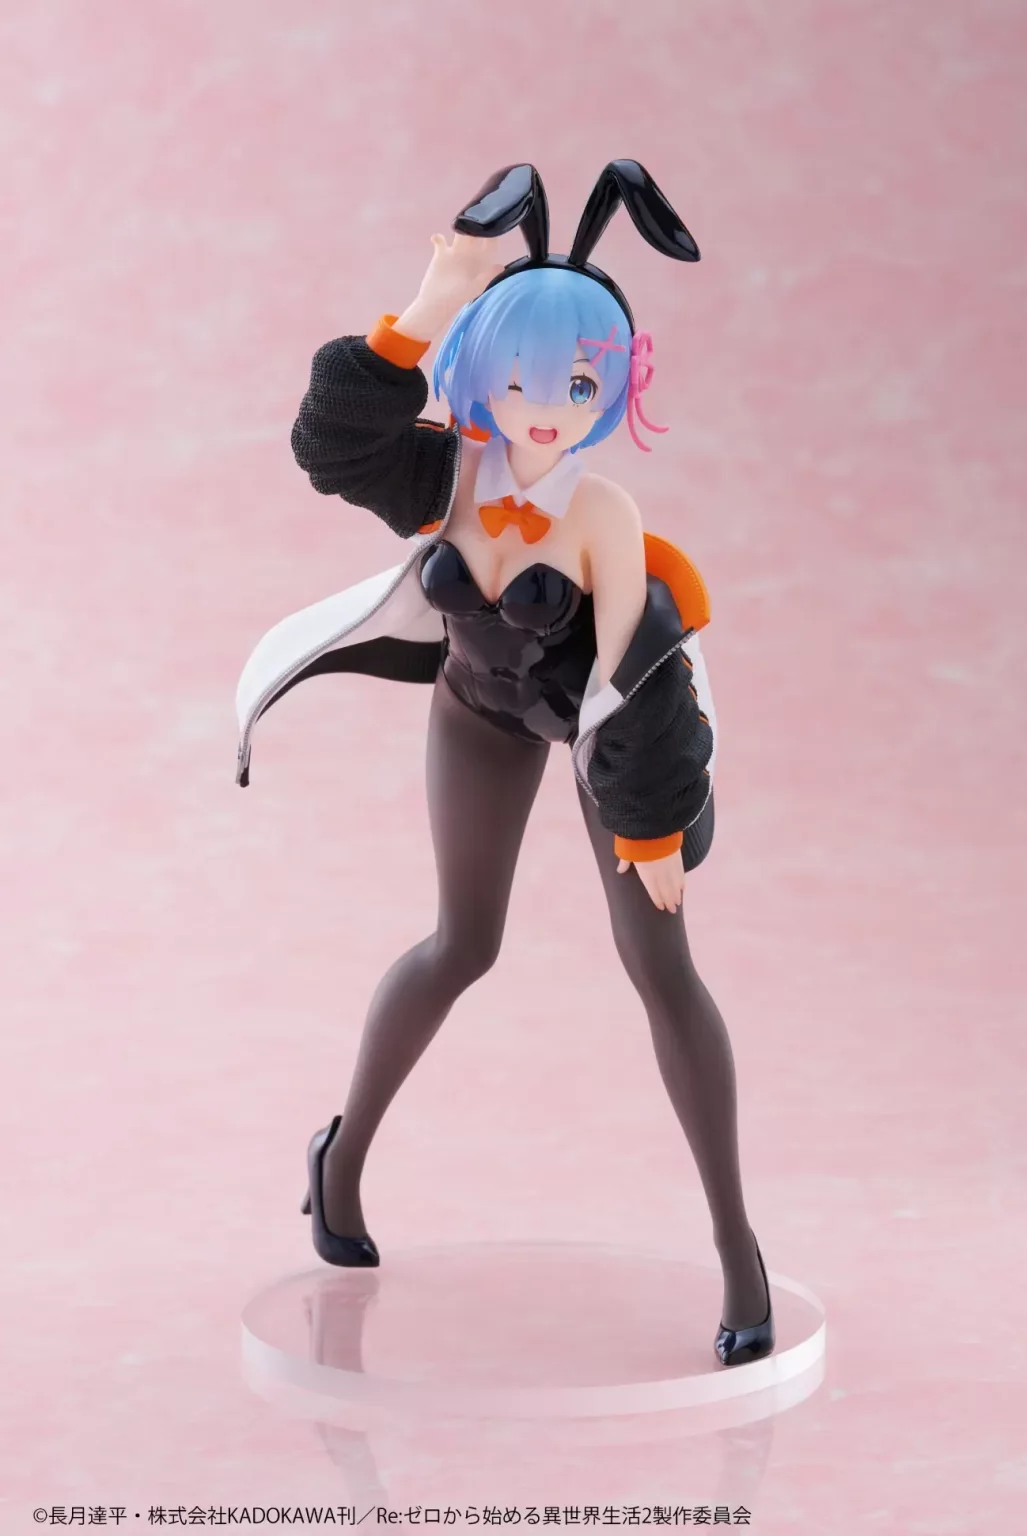 ReZero has countless Rem figures in countless styles that catch the attention of fans